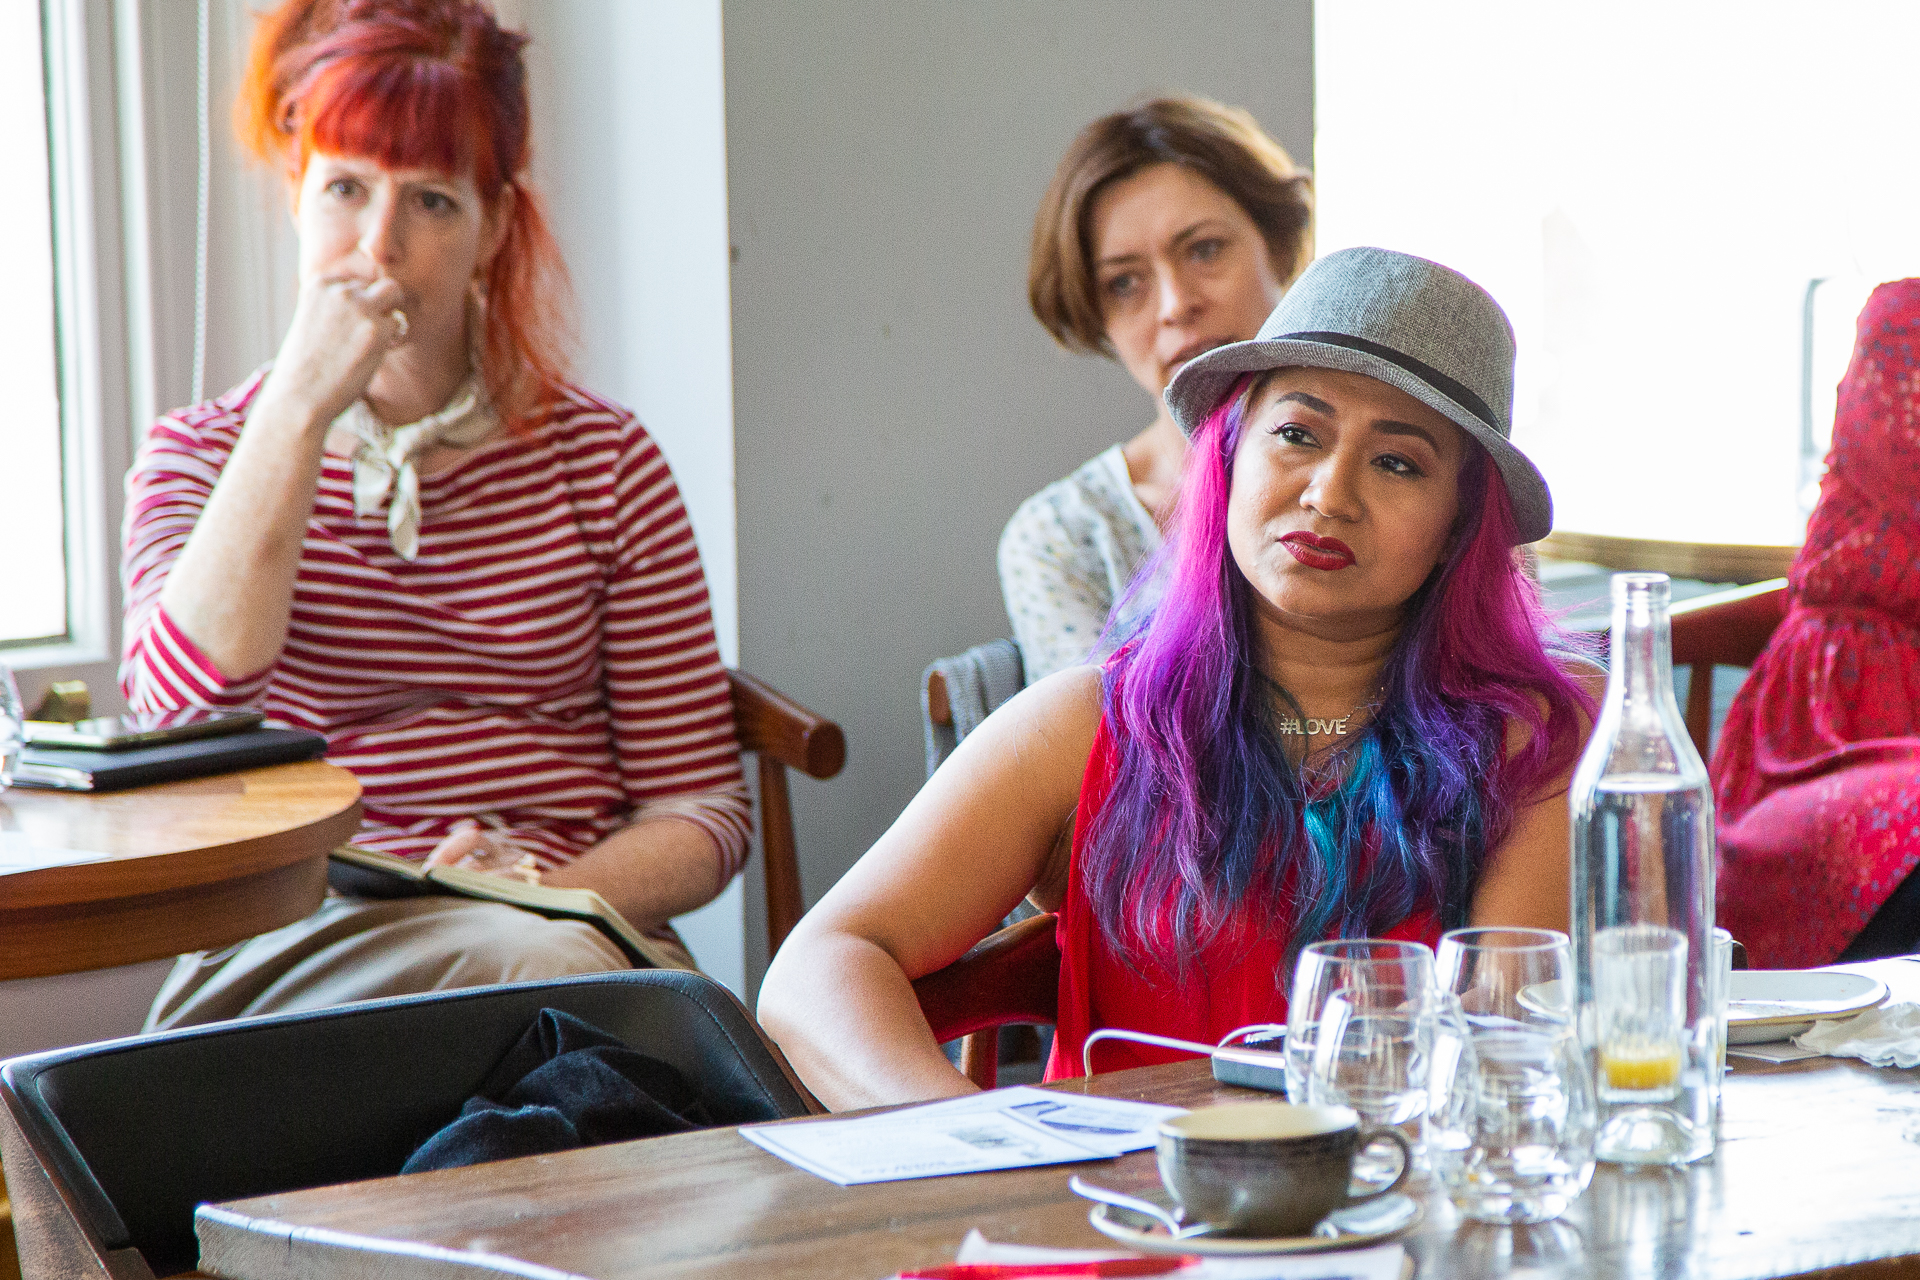 Bloggers, vloggers and journalists attend The Creative Women's Network